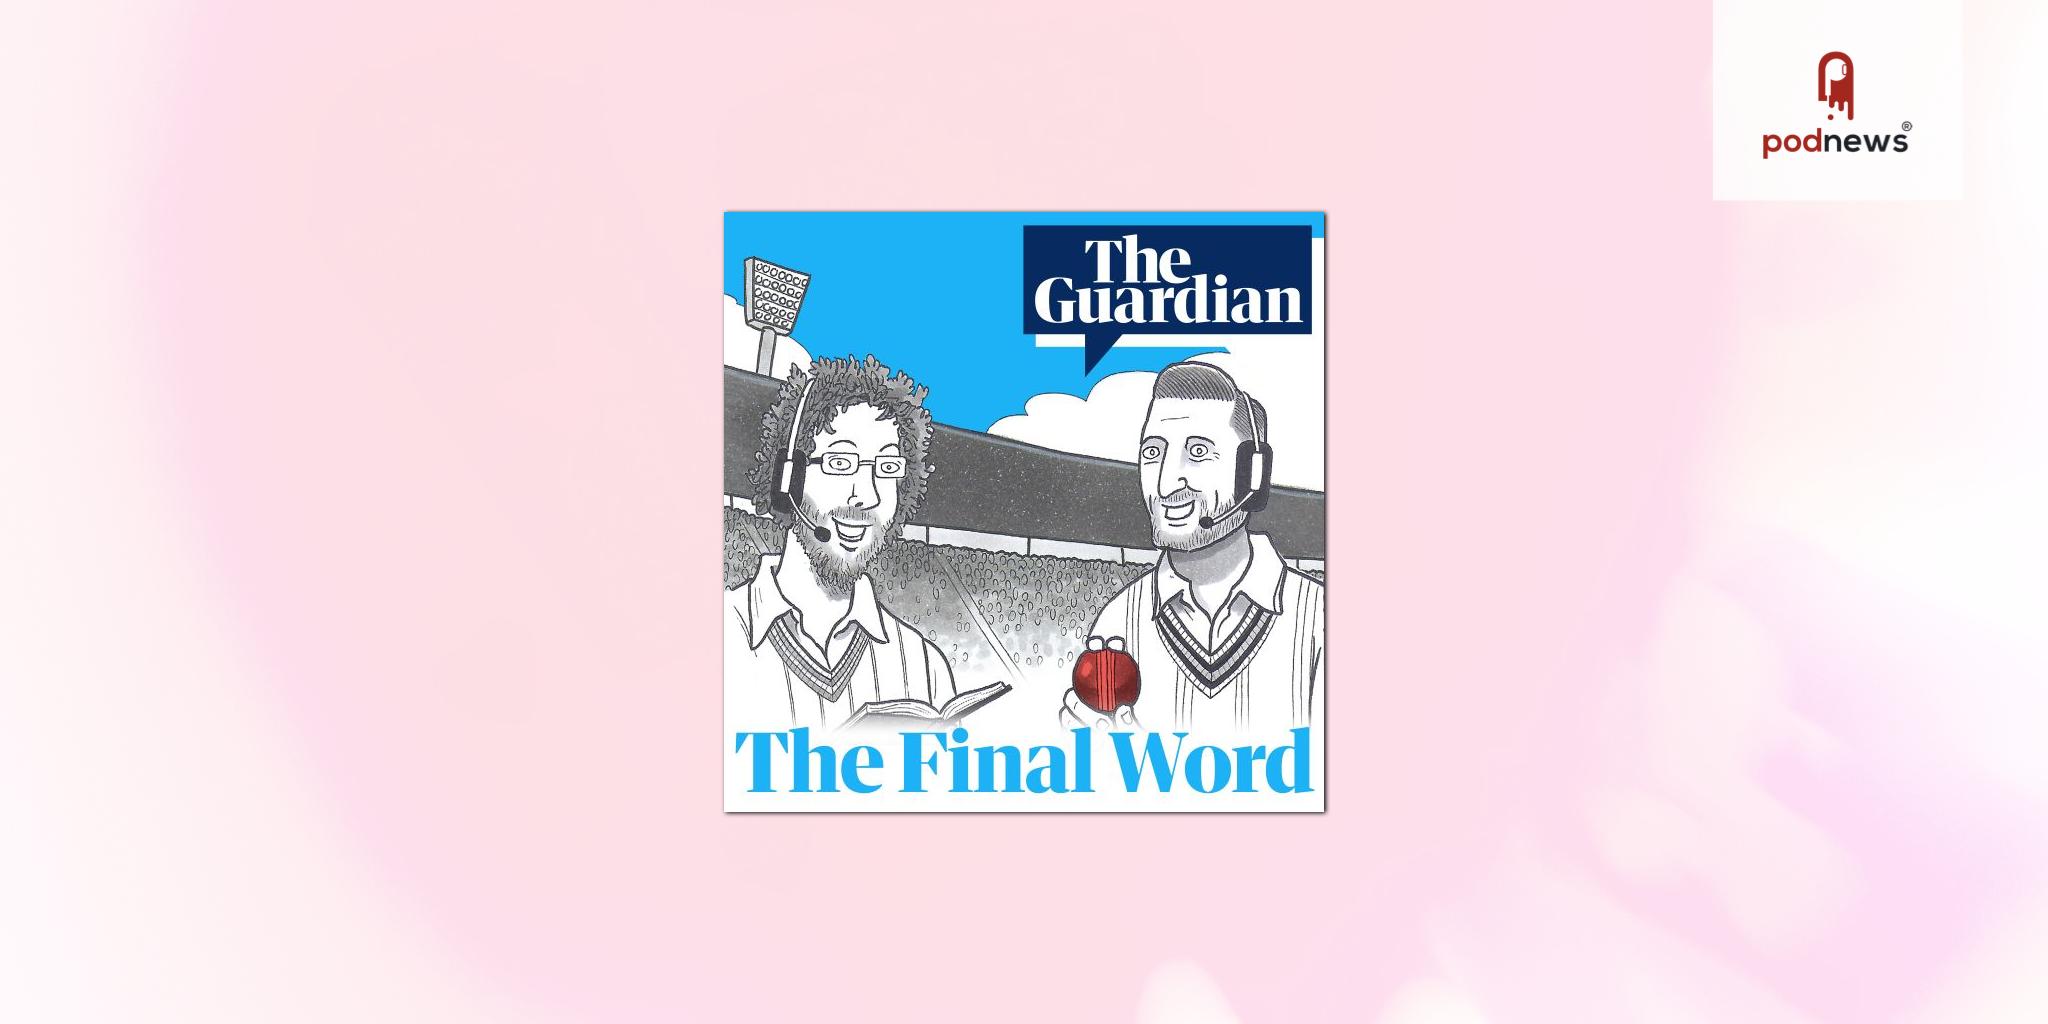 Guardian teams up with ‘the world’s best’ cricket podcast during the Ashes